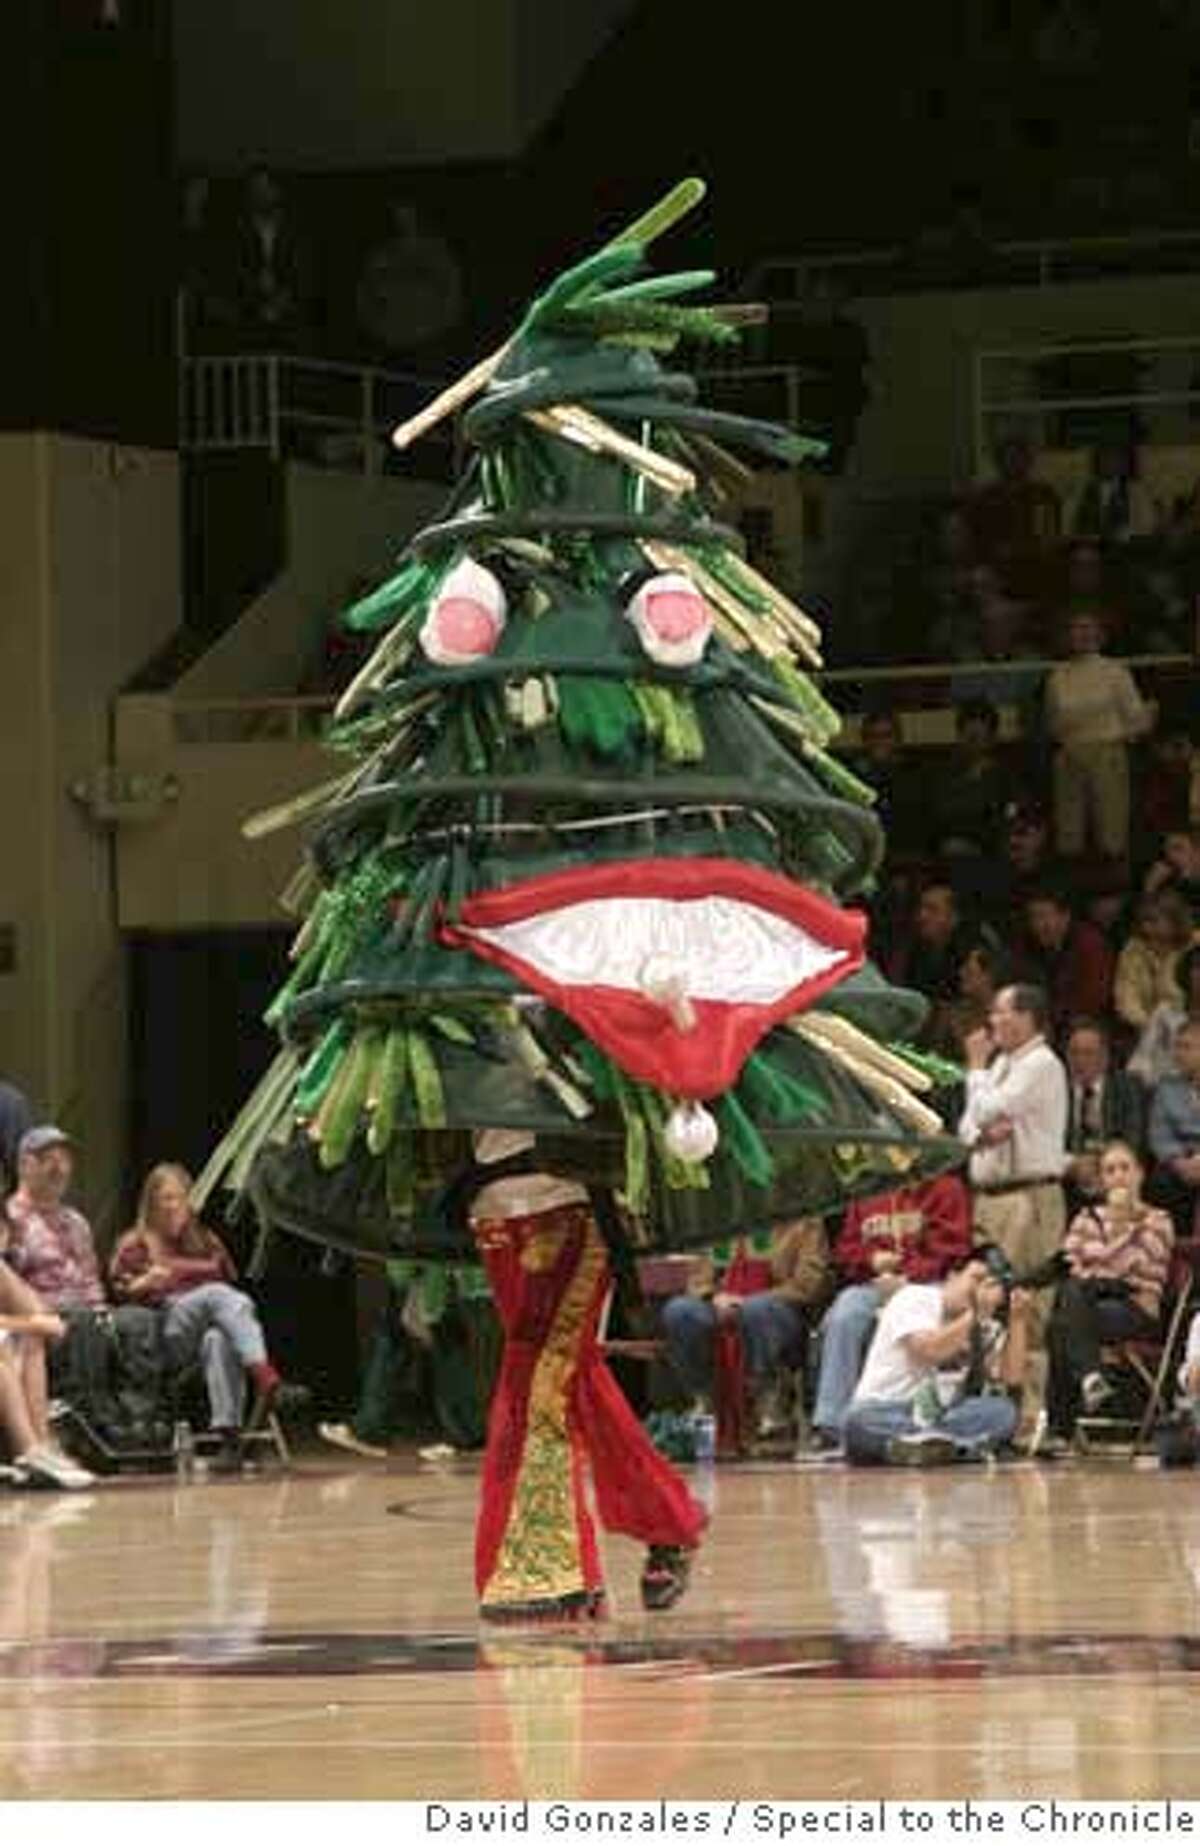 STANFORD_TREE_004.JPG The Stanford Tree during Stanford's 74-67 loss to Tennessee at Maples Pavilion in Stanford, CA. 4 December 2005: Photo by David Gonzales/Special to the Chronicle.